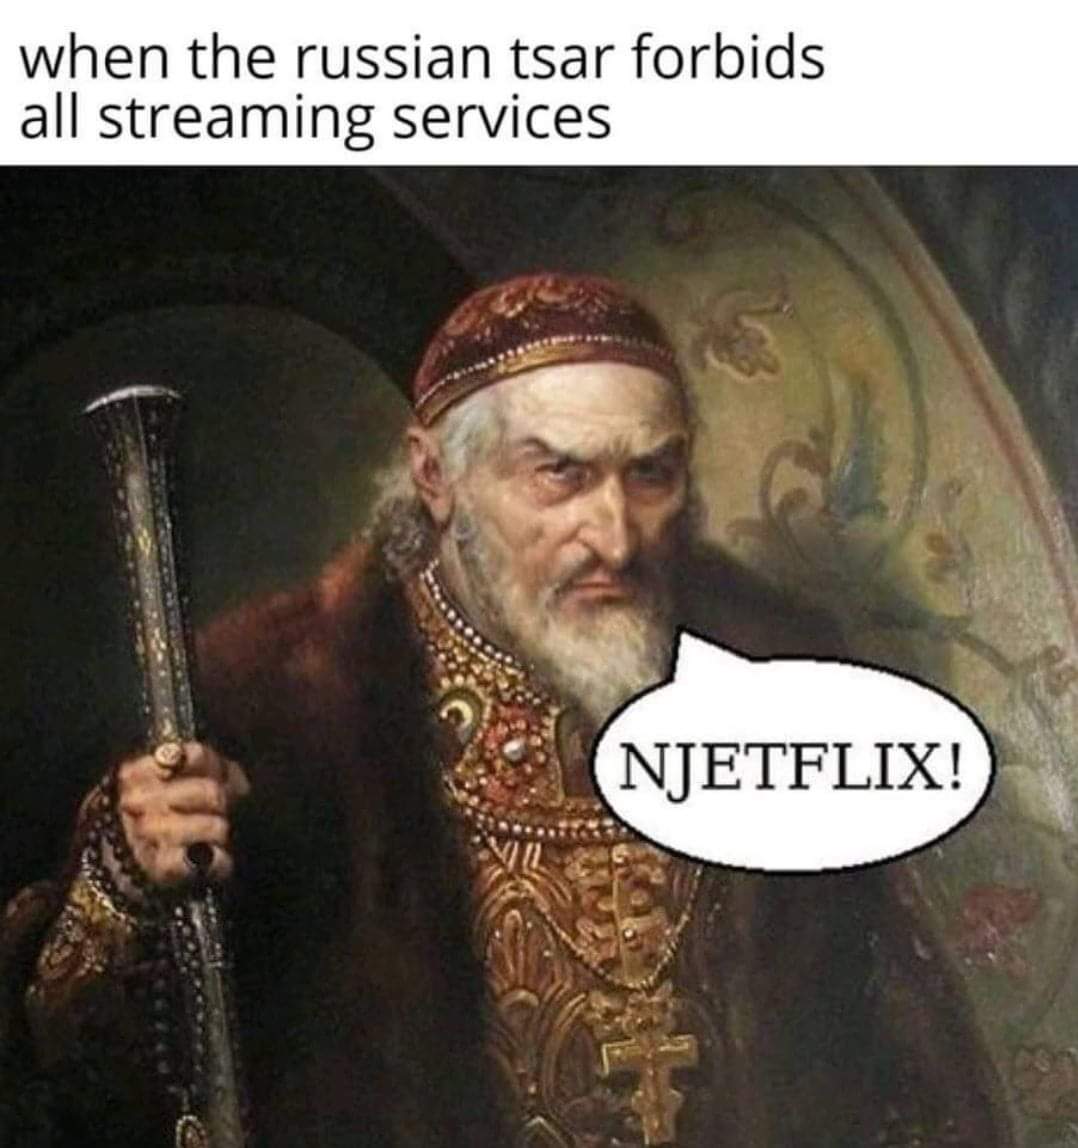 slavic meme - when the russian tsar forbids all streaming services Njetflix!